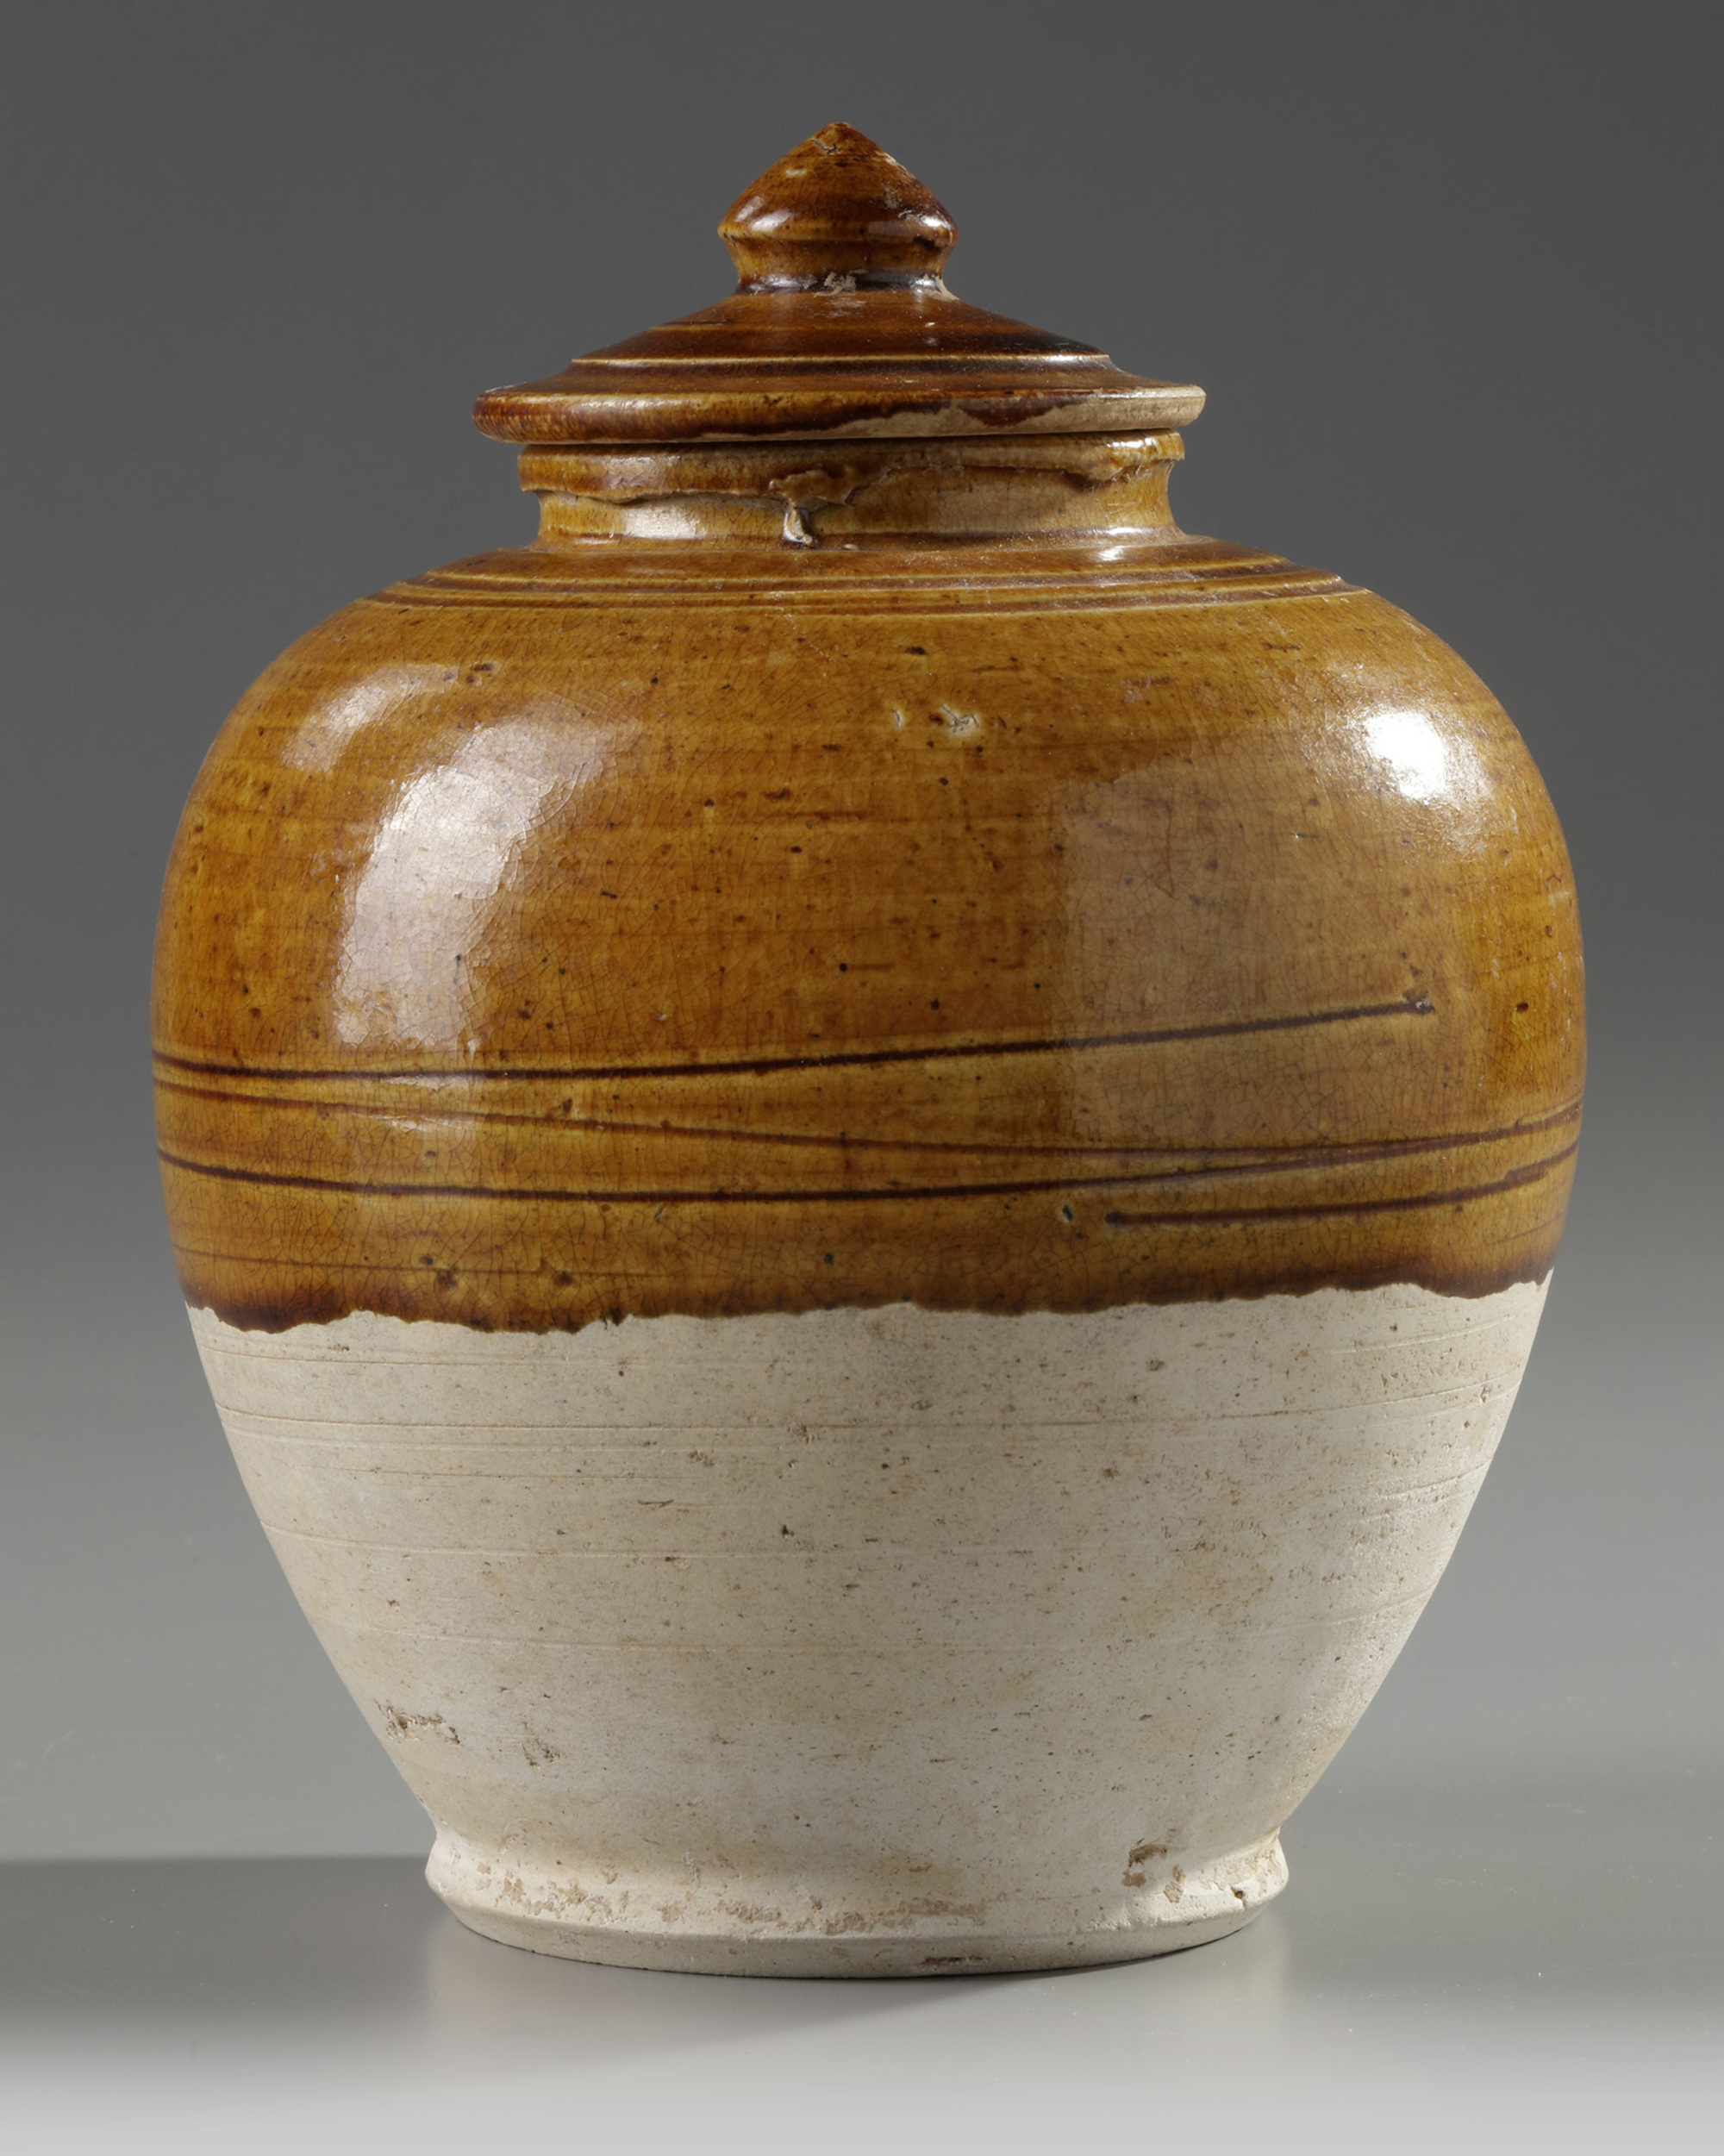 A CHINESE AMBER-GLAZED JAR AND COVER, TANG DYNASTY (618-907) - Image 2 of 4